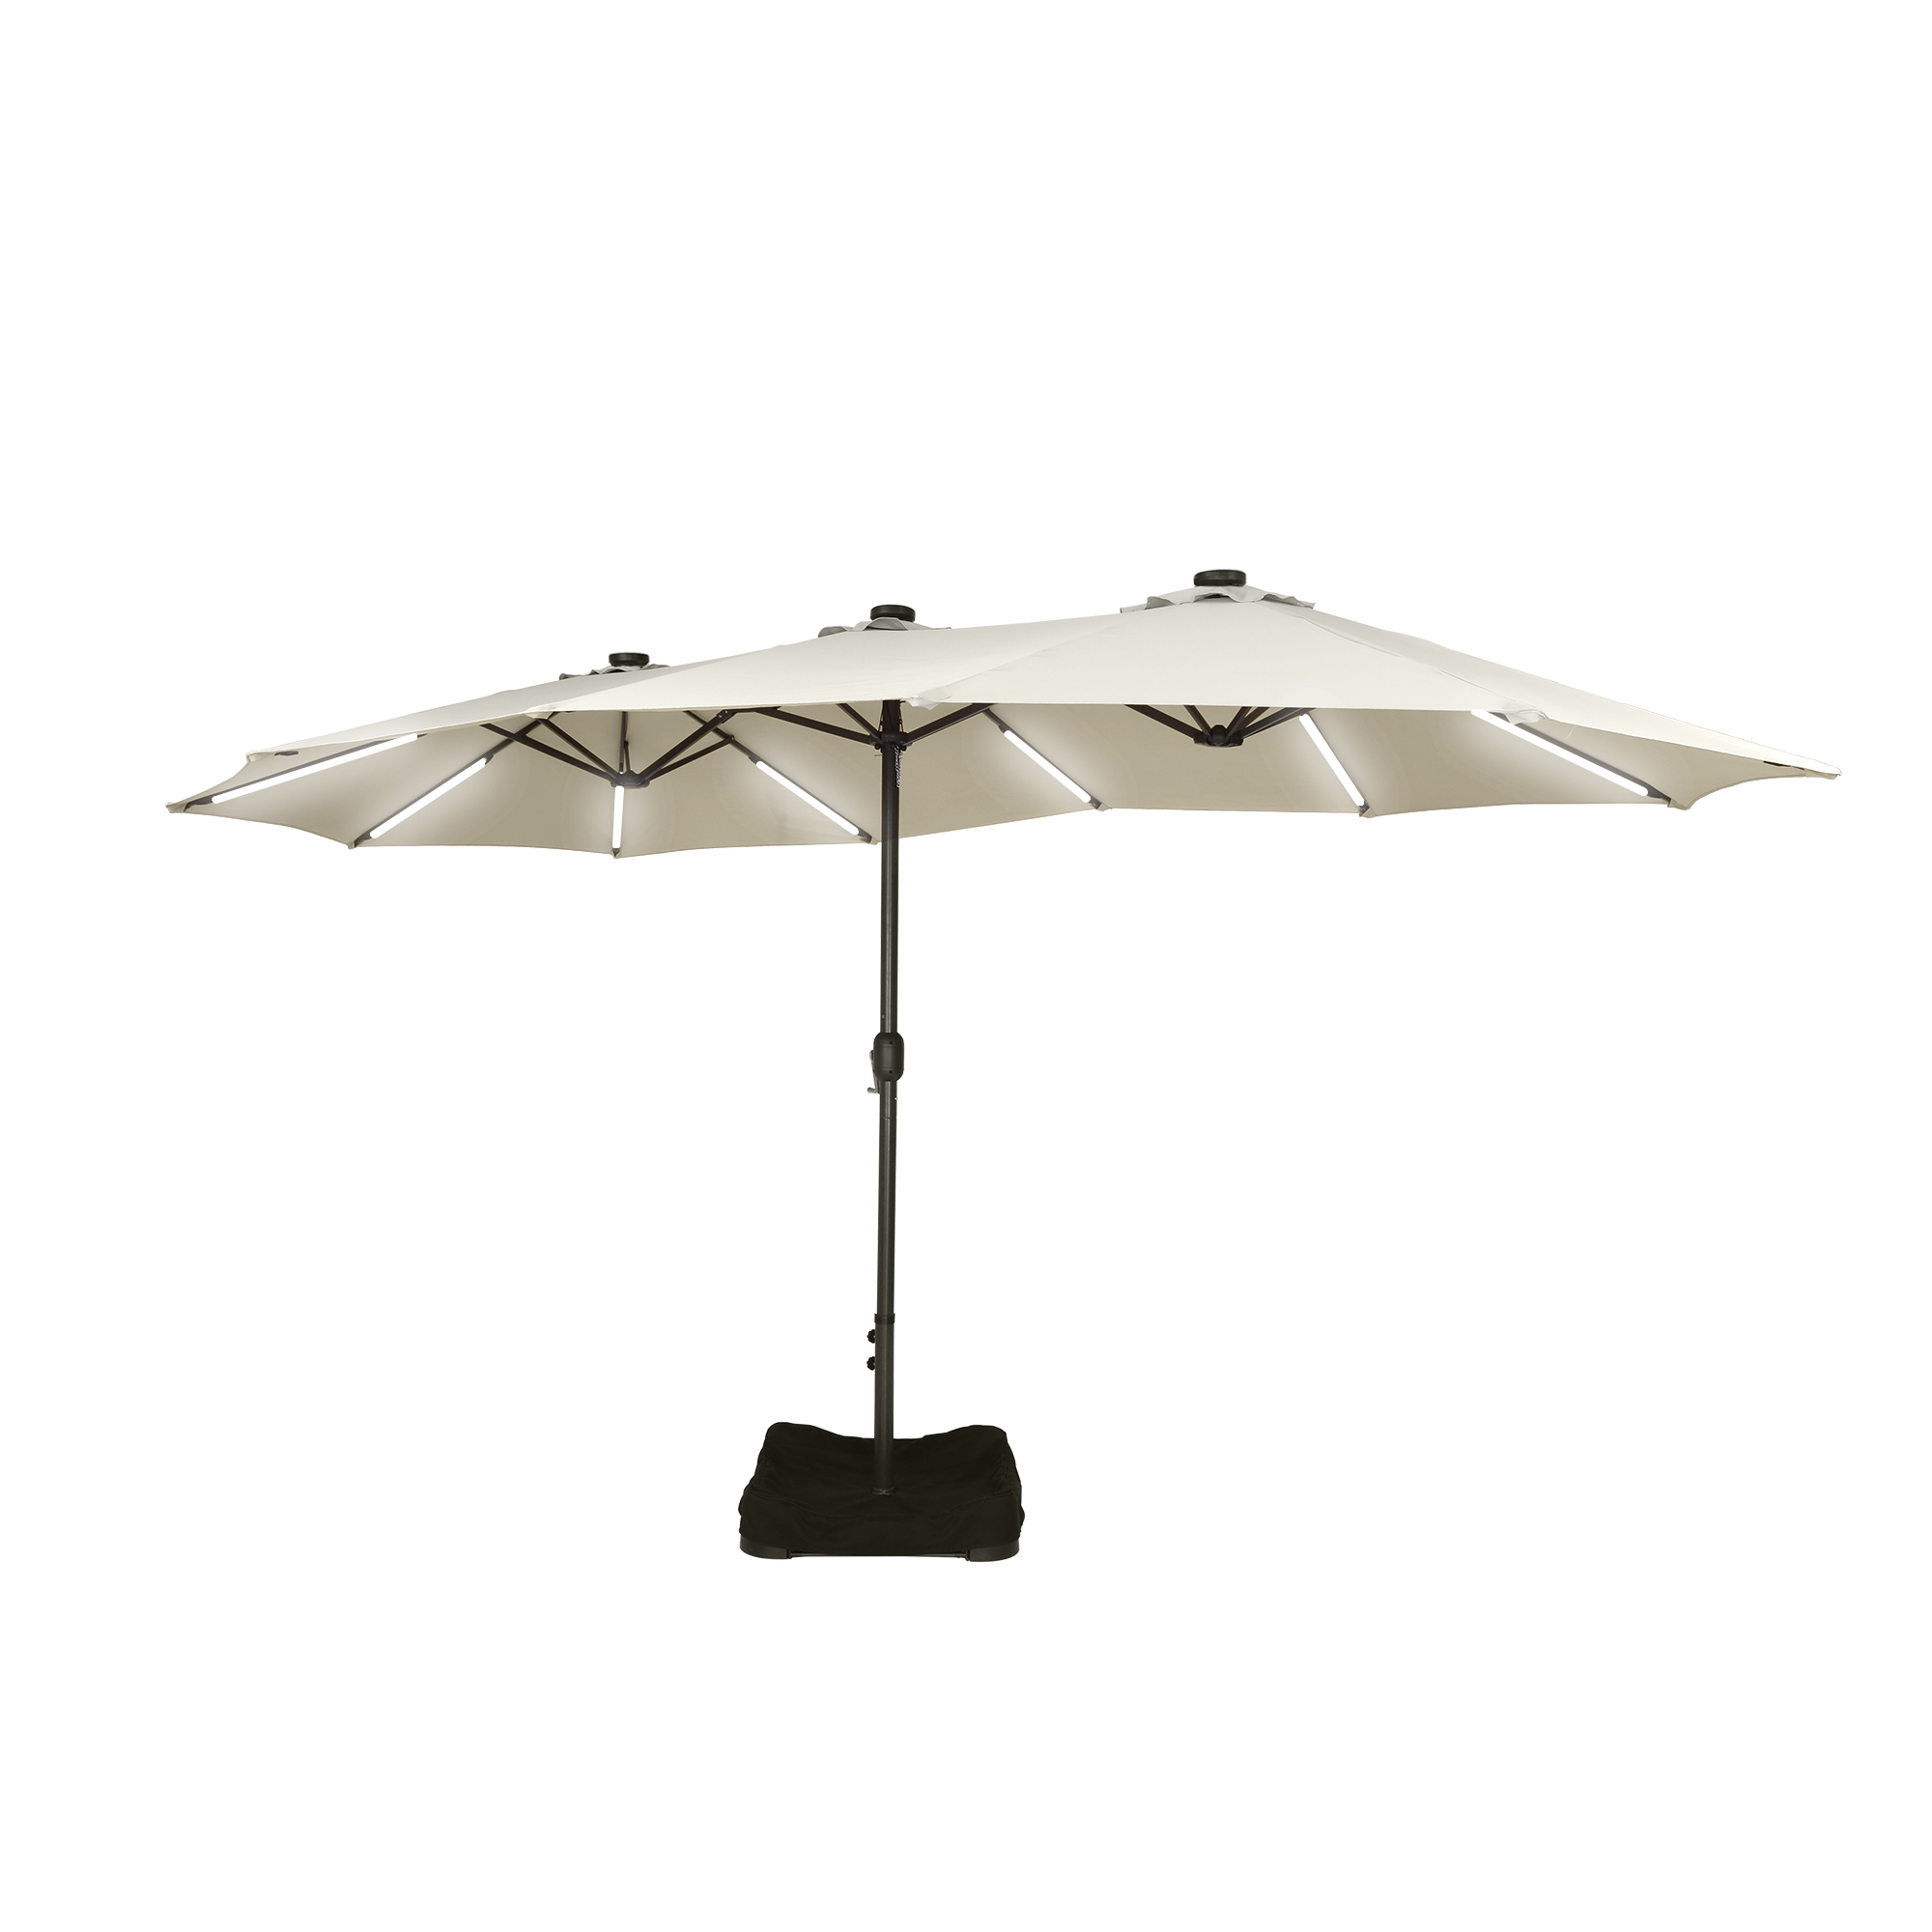 15 FT Patio Market Umbrella with Base and Removable Solar LED Strip Lights, UV Sun Protection & Easy Crank for Deck Pool Patio